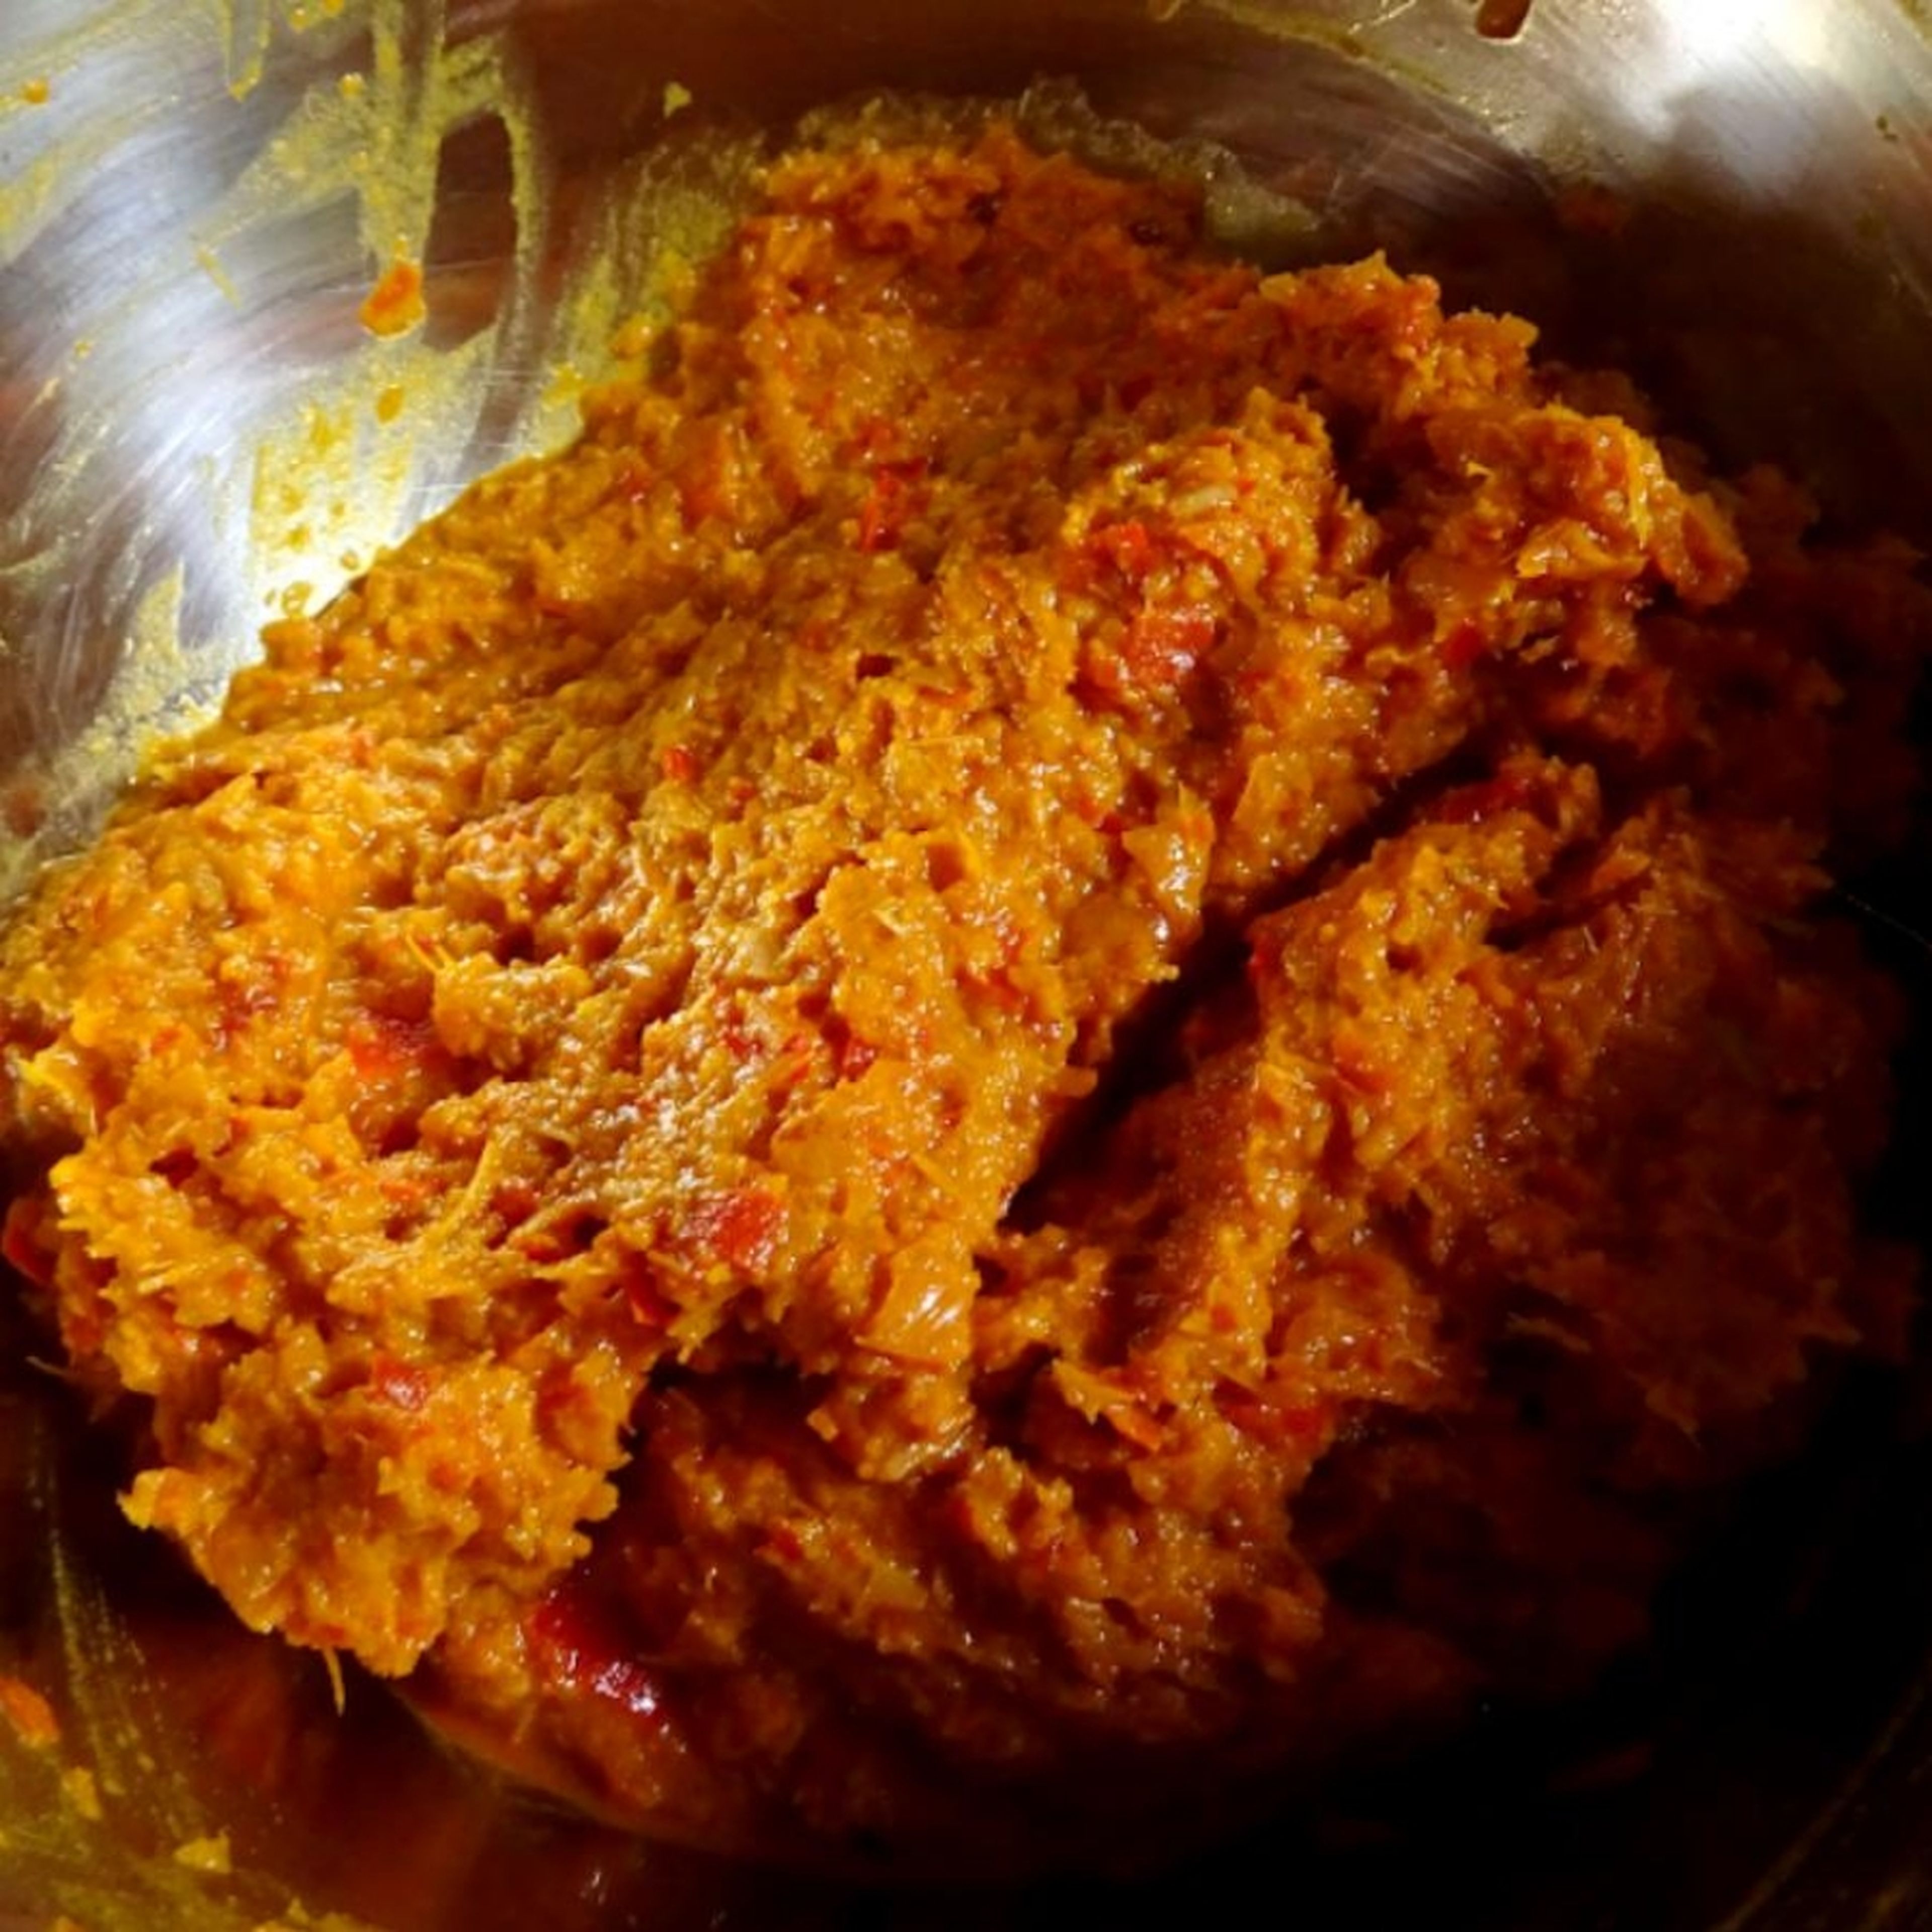 Prepare the curry paste by chopping 2 stalks of lemongrass, chillies, dried chillies, shallots, garlic, and gallangal before putting it into the pestle and mortar to pound until a smooth paste is formed. Combine the tumeric powder at the end and add in some salt to taste.